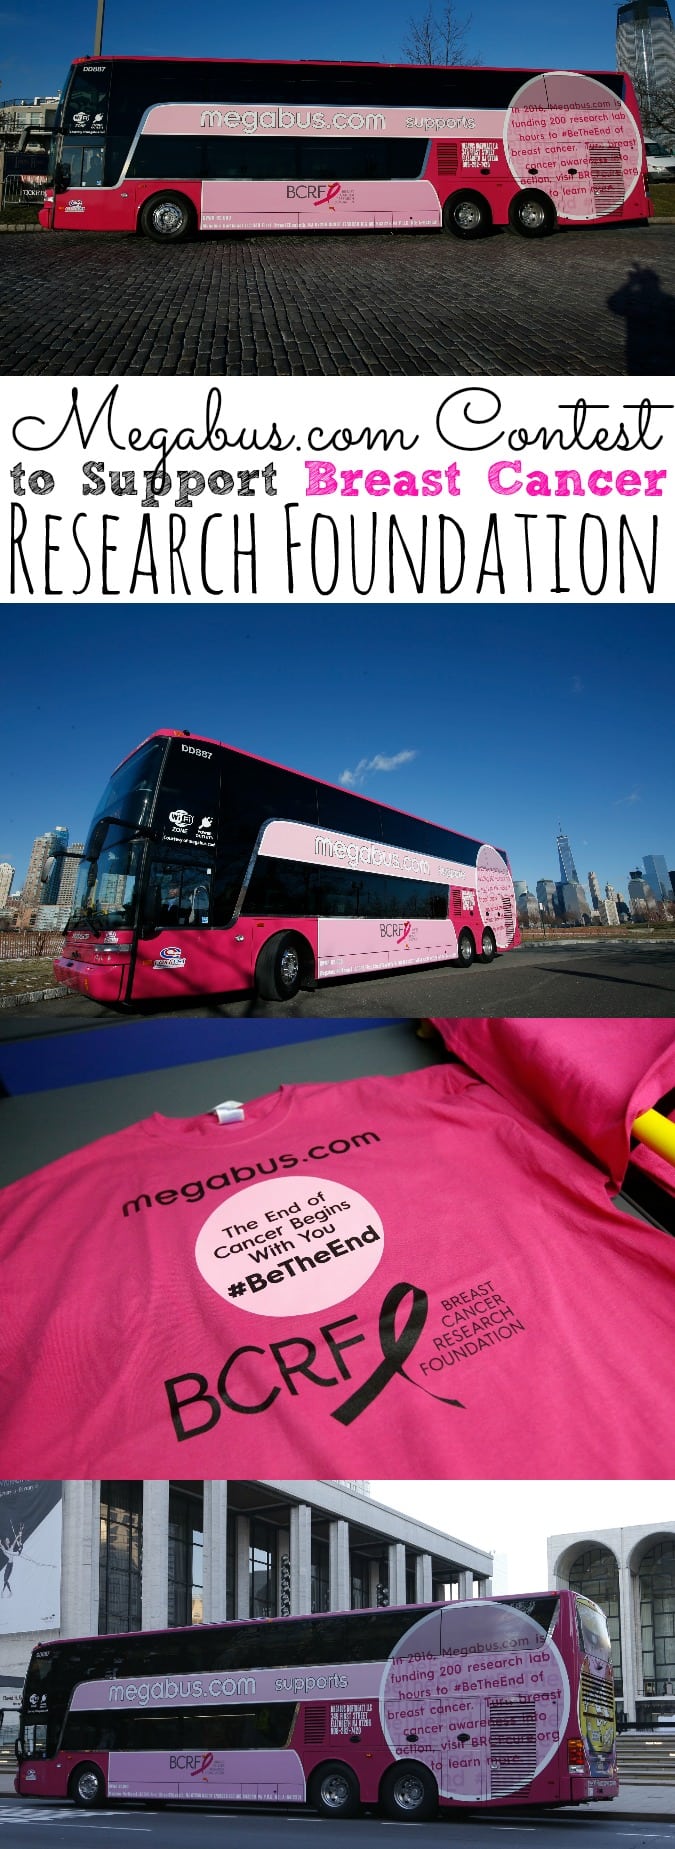 Megabus.com Contest To Support Breast Cancer Research Foundation - simplytodaylife.com